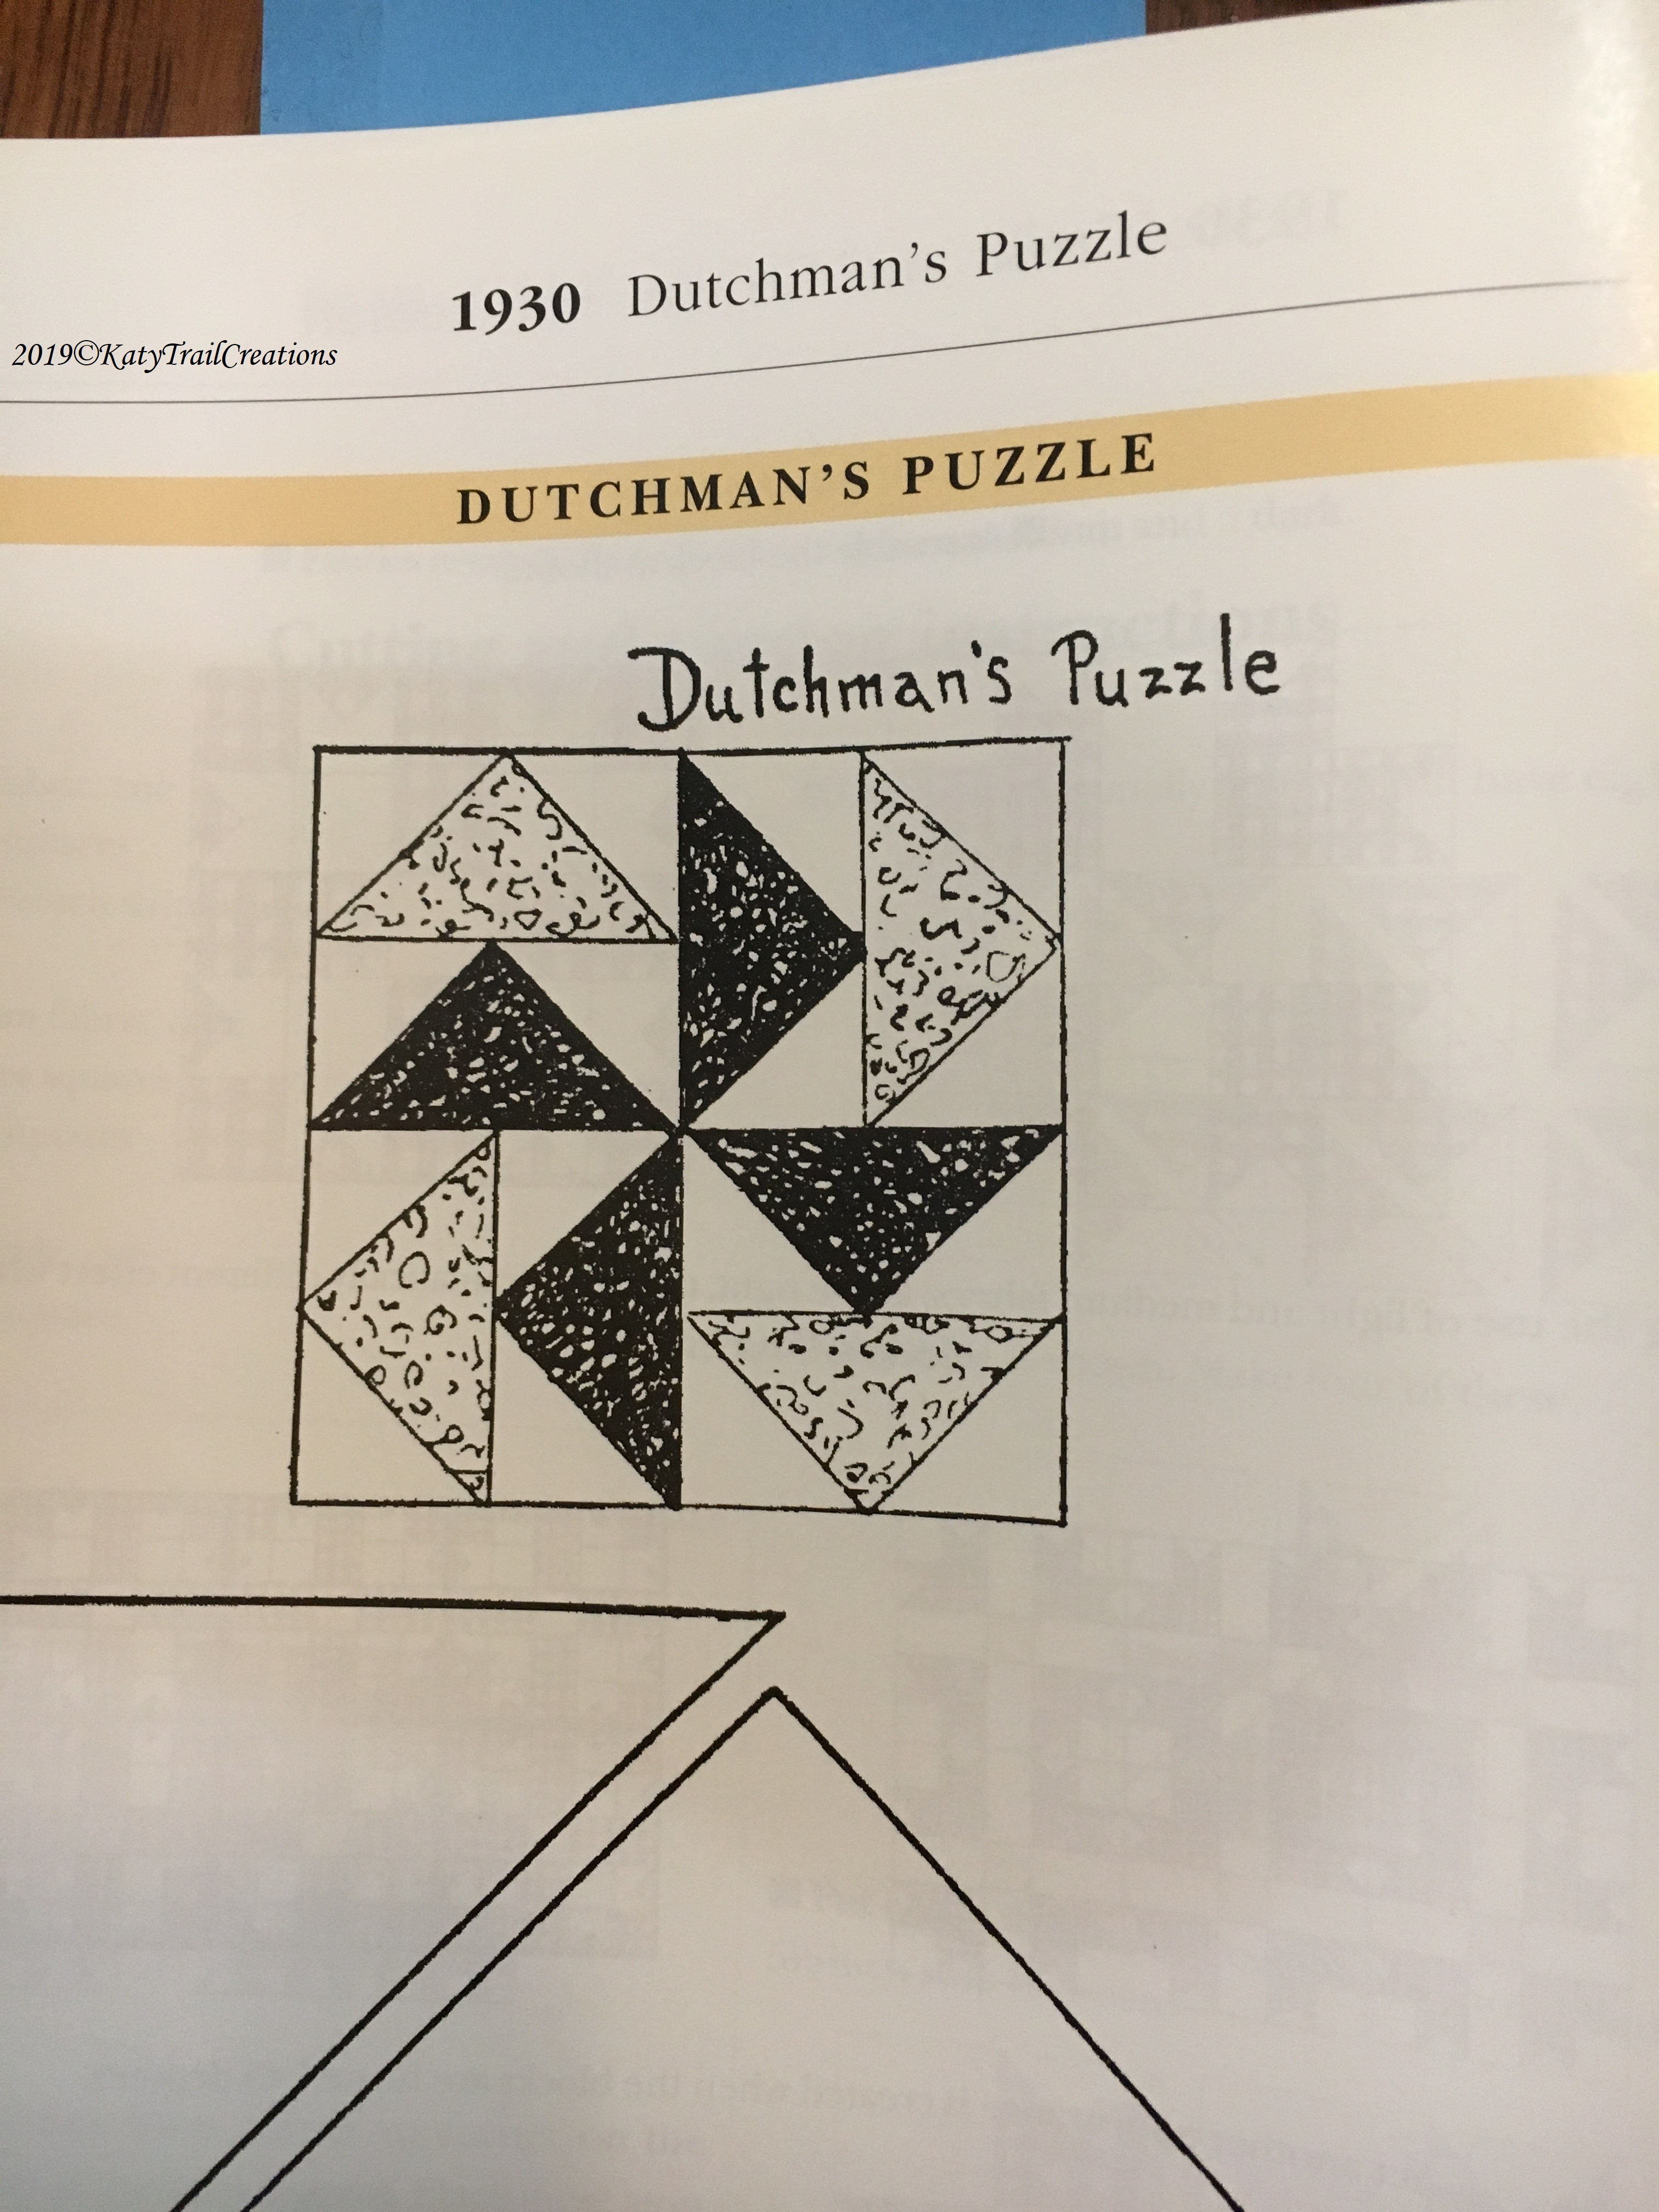 1930 Dutchman's Puzzle from Star Quilts